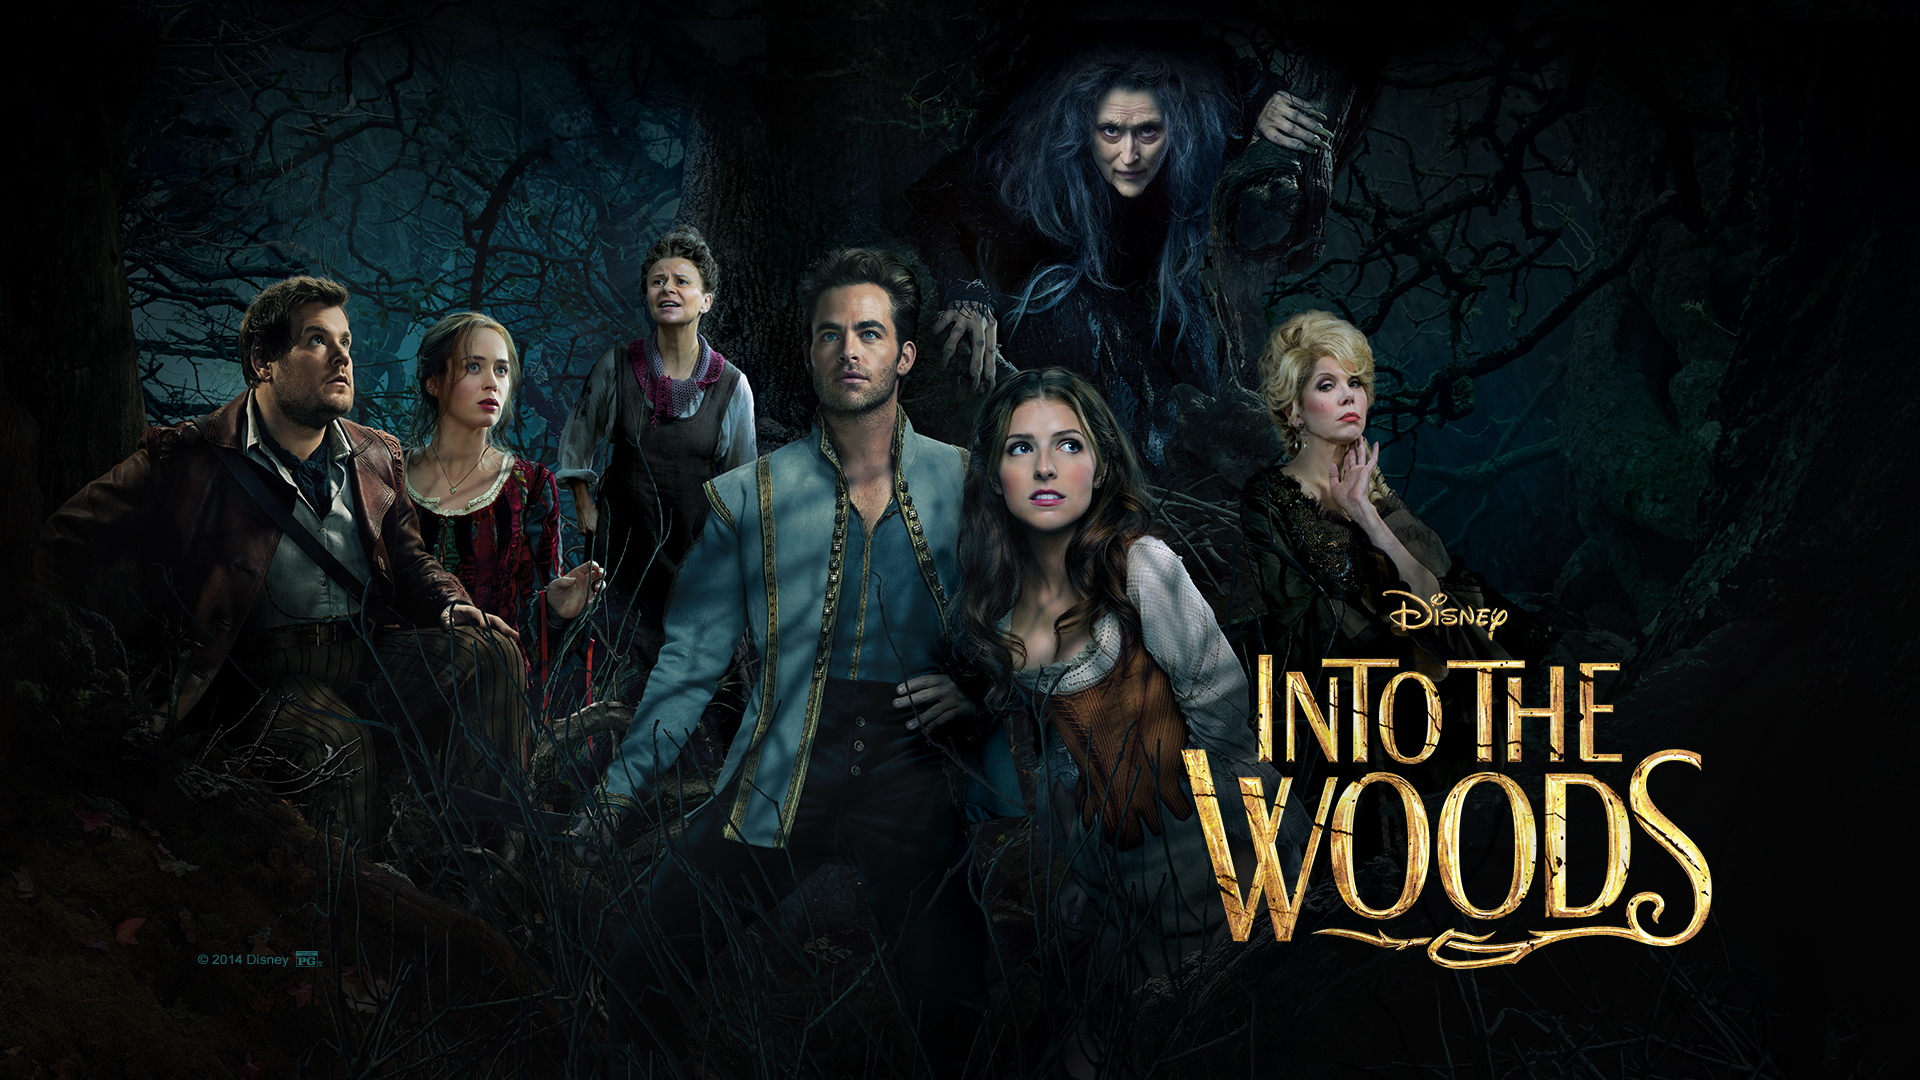 into-the-woods-movie-review-85971c0d-c48e-4bf1-8ff5-188cae9cb4a1-jpeg-219304.jpg